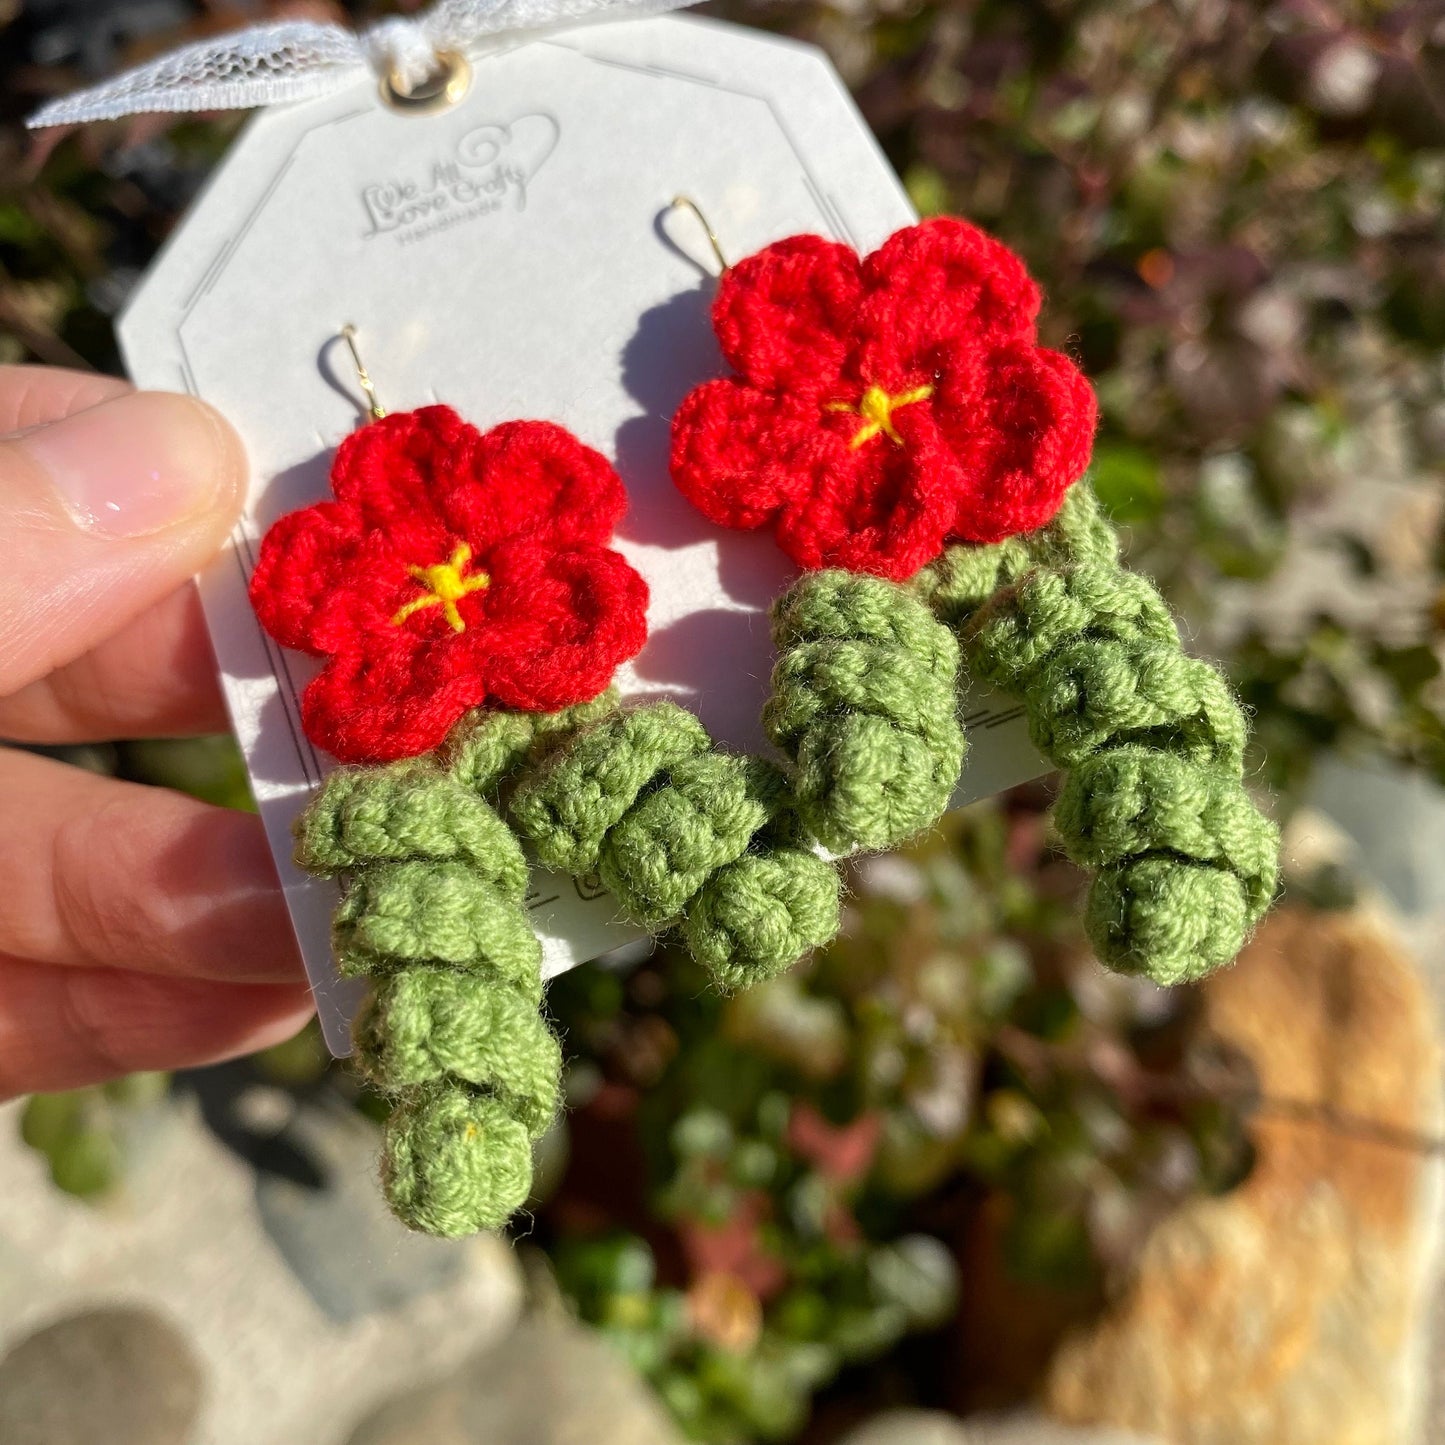 Red flower with curled leaves crochet dangle earrings/Microcrochet/14k gold/gift for her/kitted twine/Knitting handmade jewelry/Ship from US